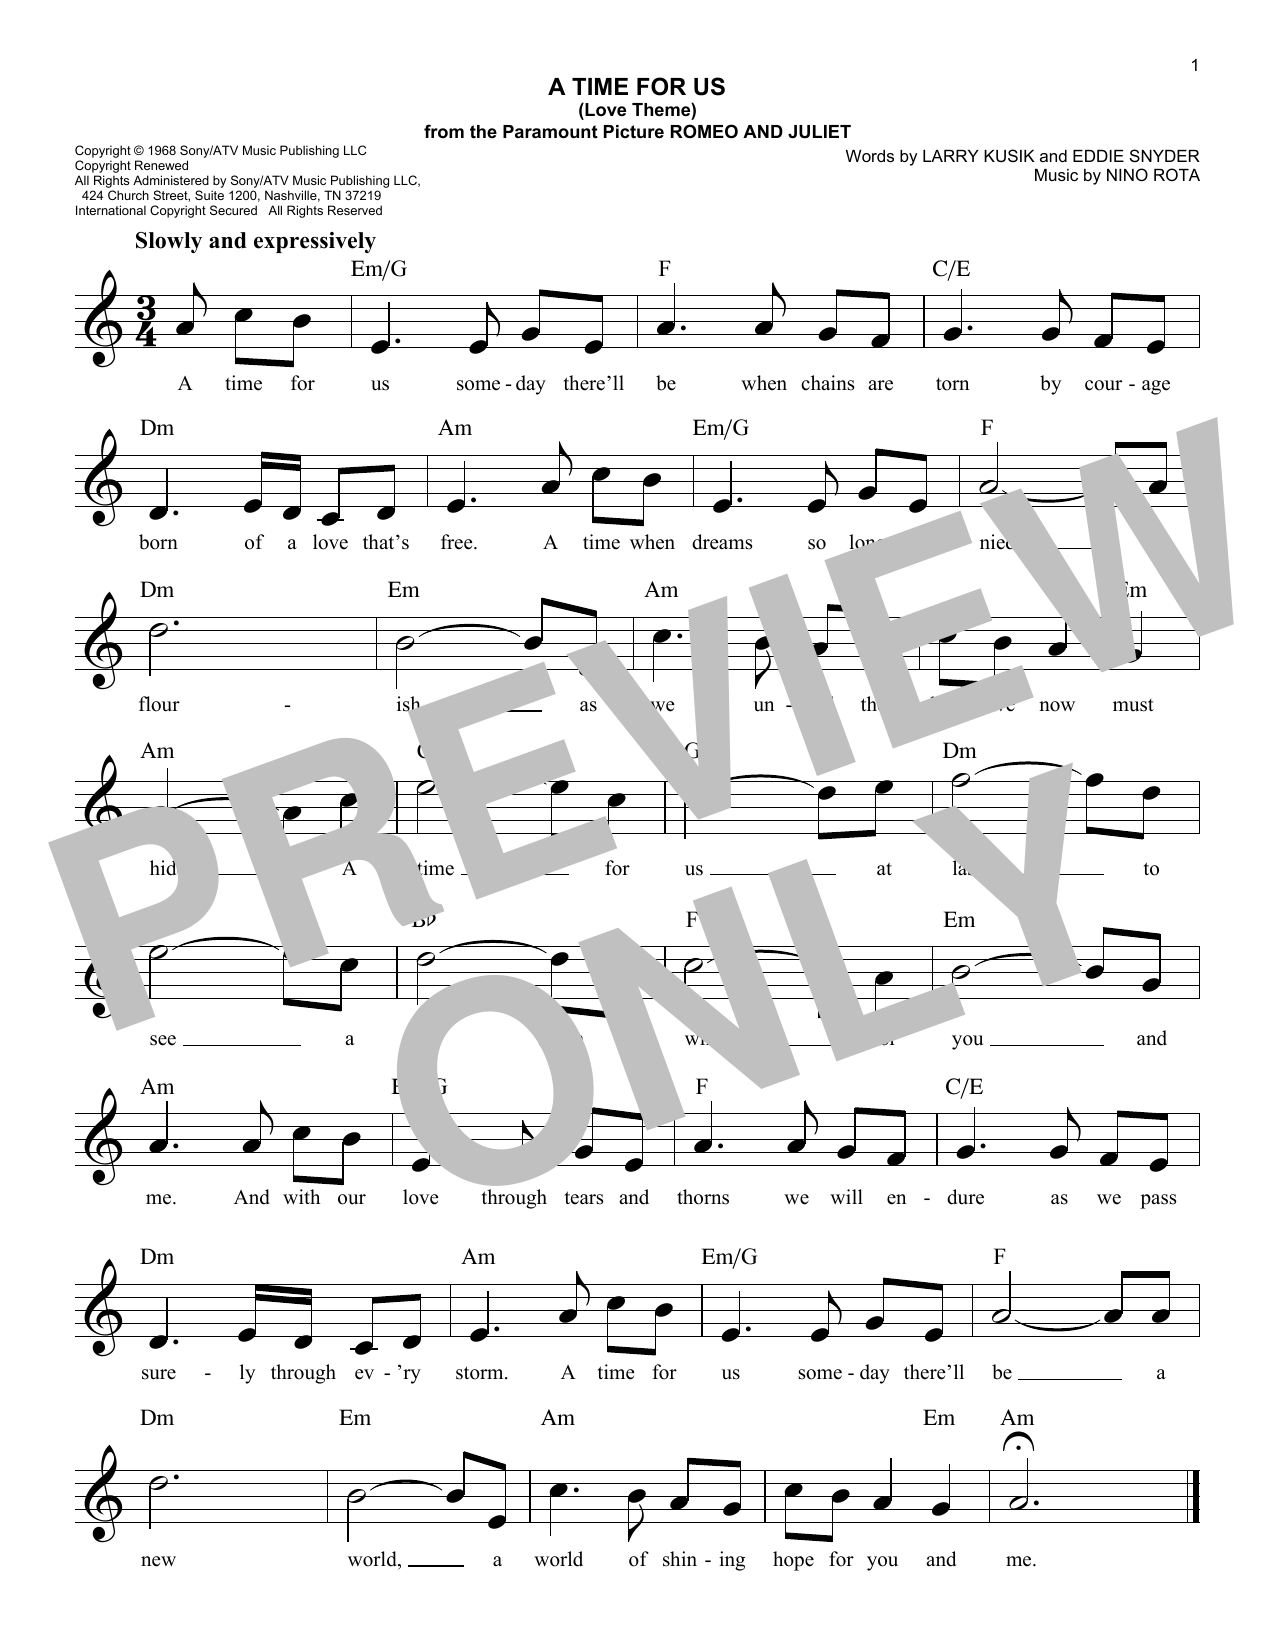 Nino Rota A Time For Us Love Theme From Romeo And Juliet Sheet Music Download Pdf Score